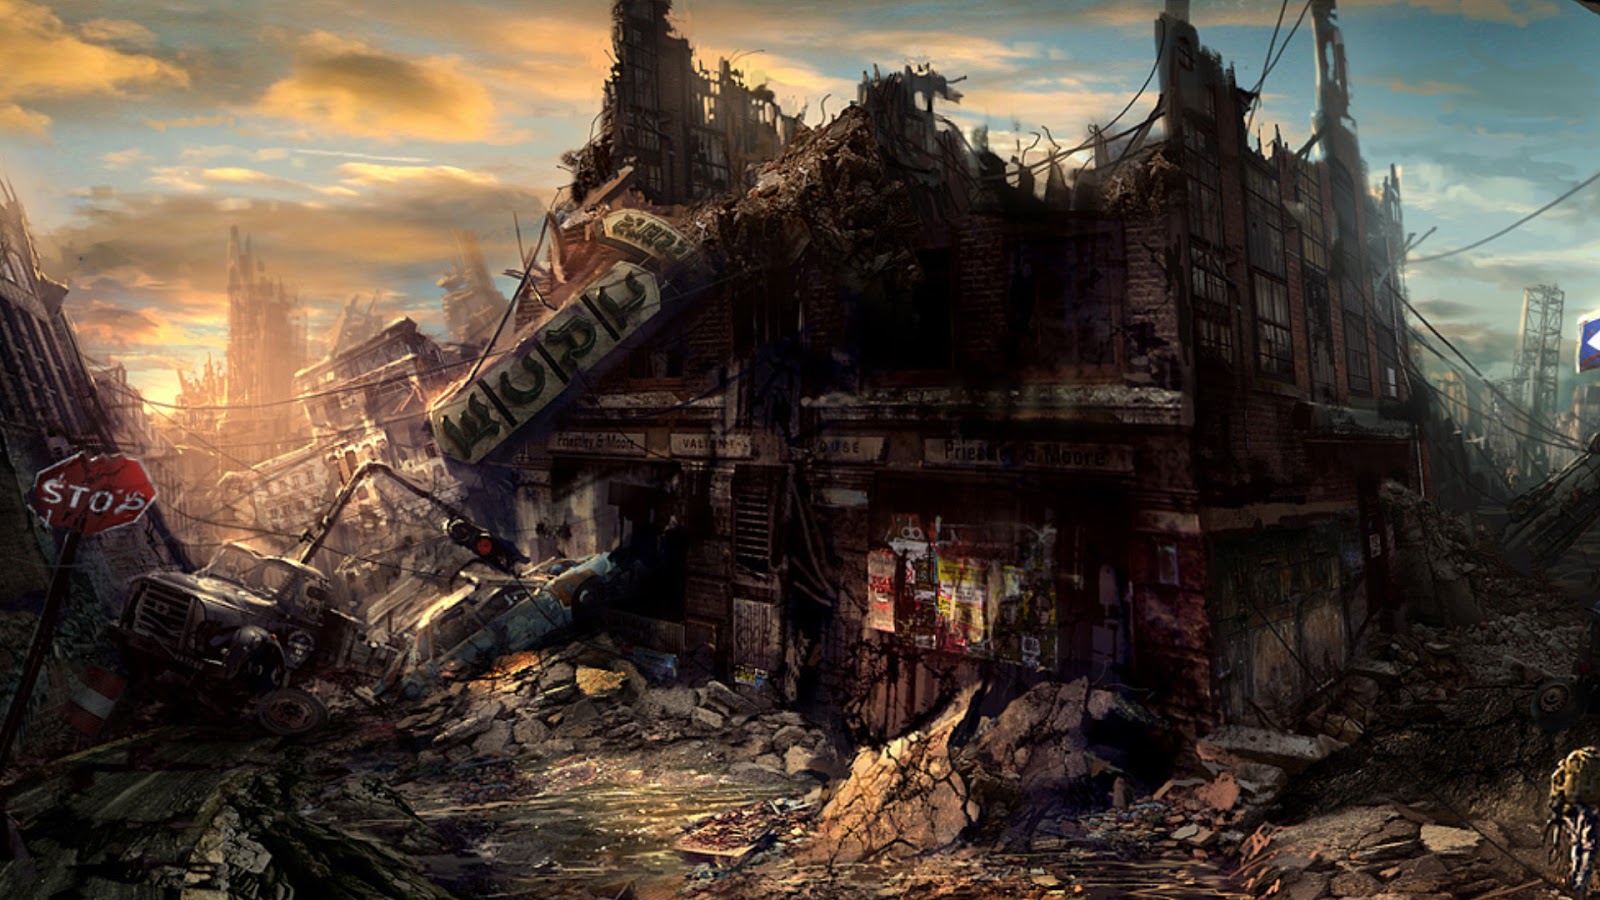 post apocalyptic wallpaper,action adventure game,ruins,strategy video game,adventure game,sky